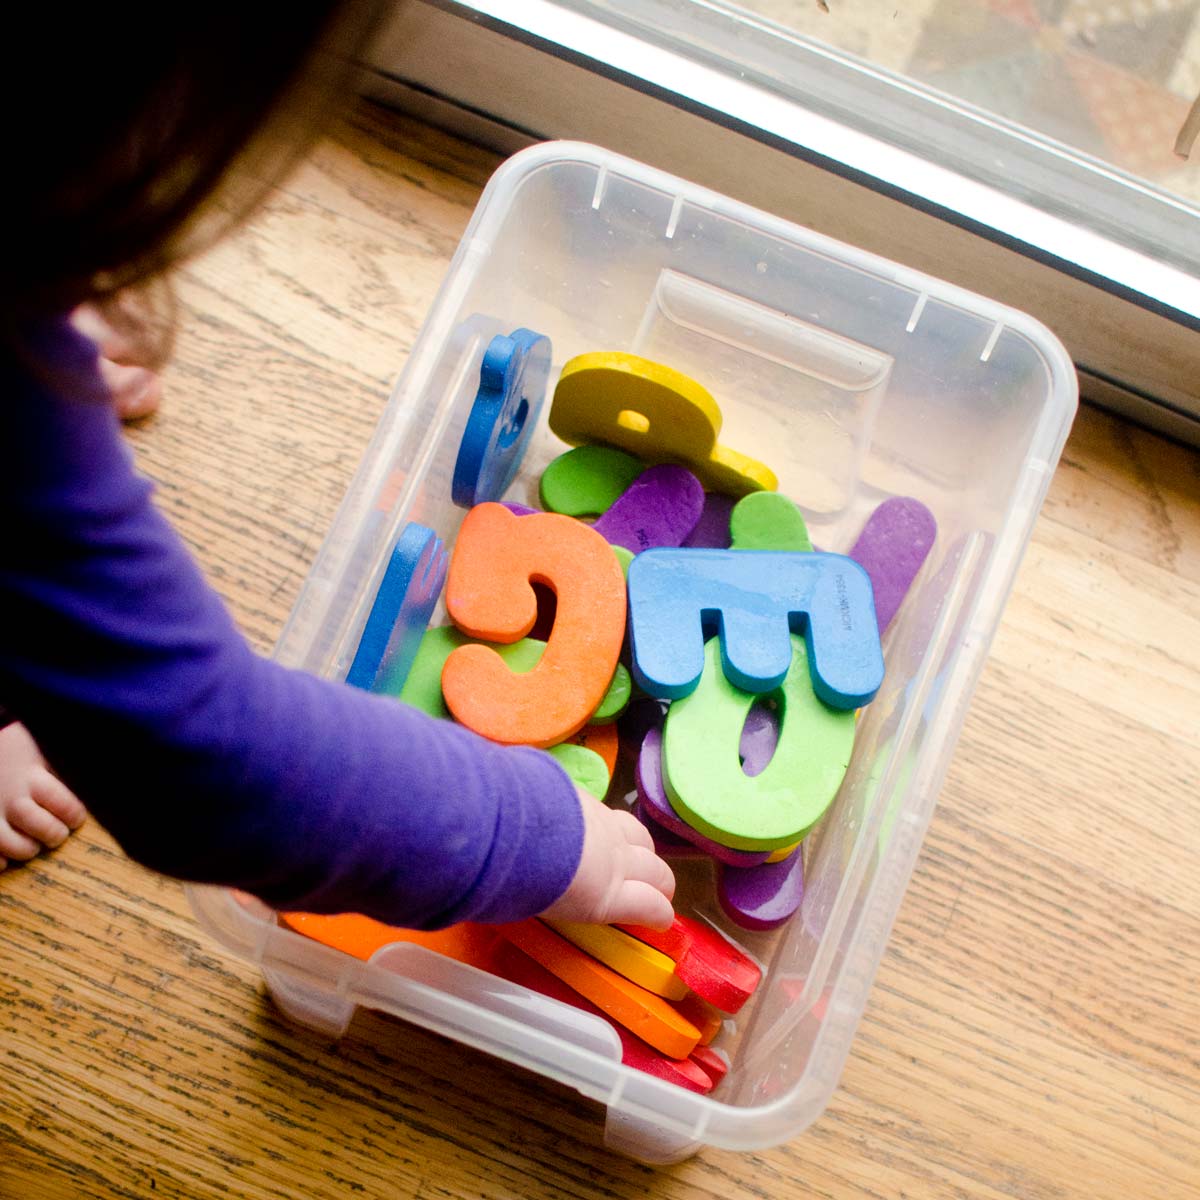 A child reaches into a plastic container full of water and foam alphabet letters.